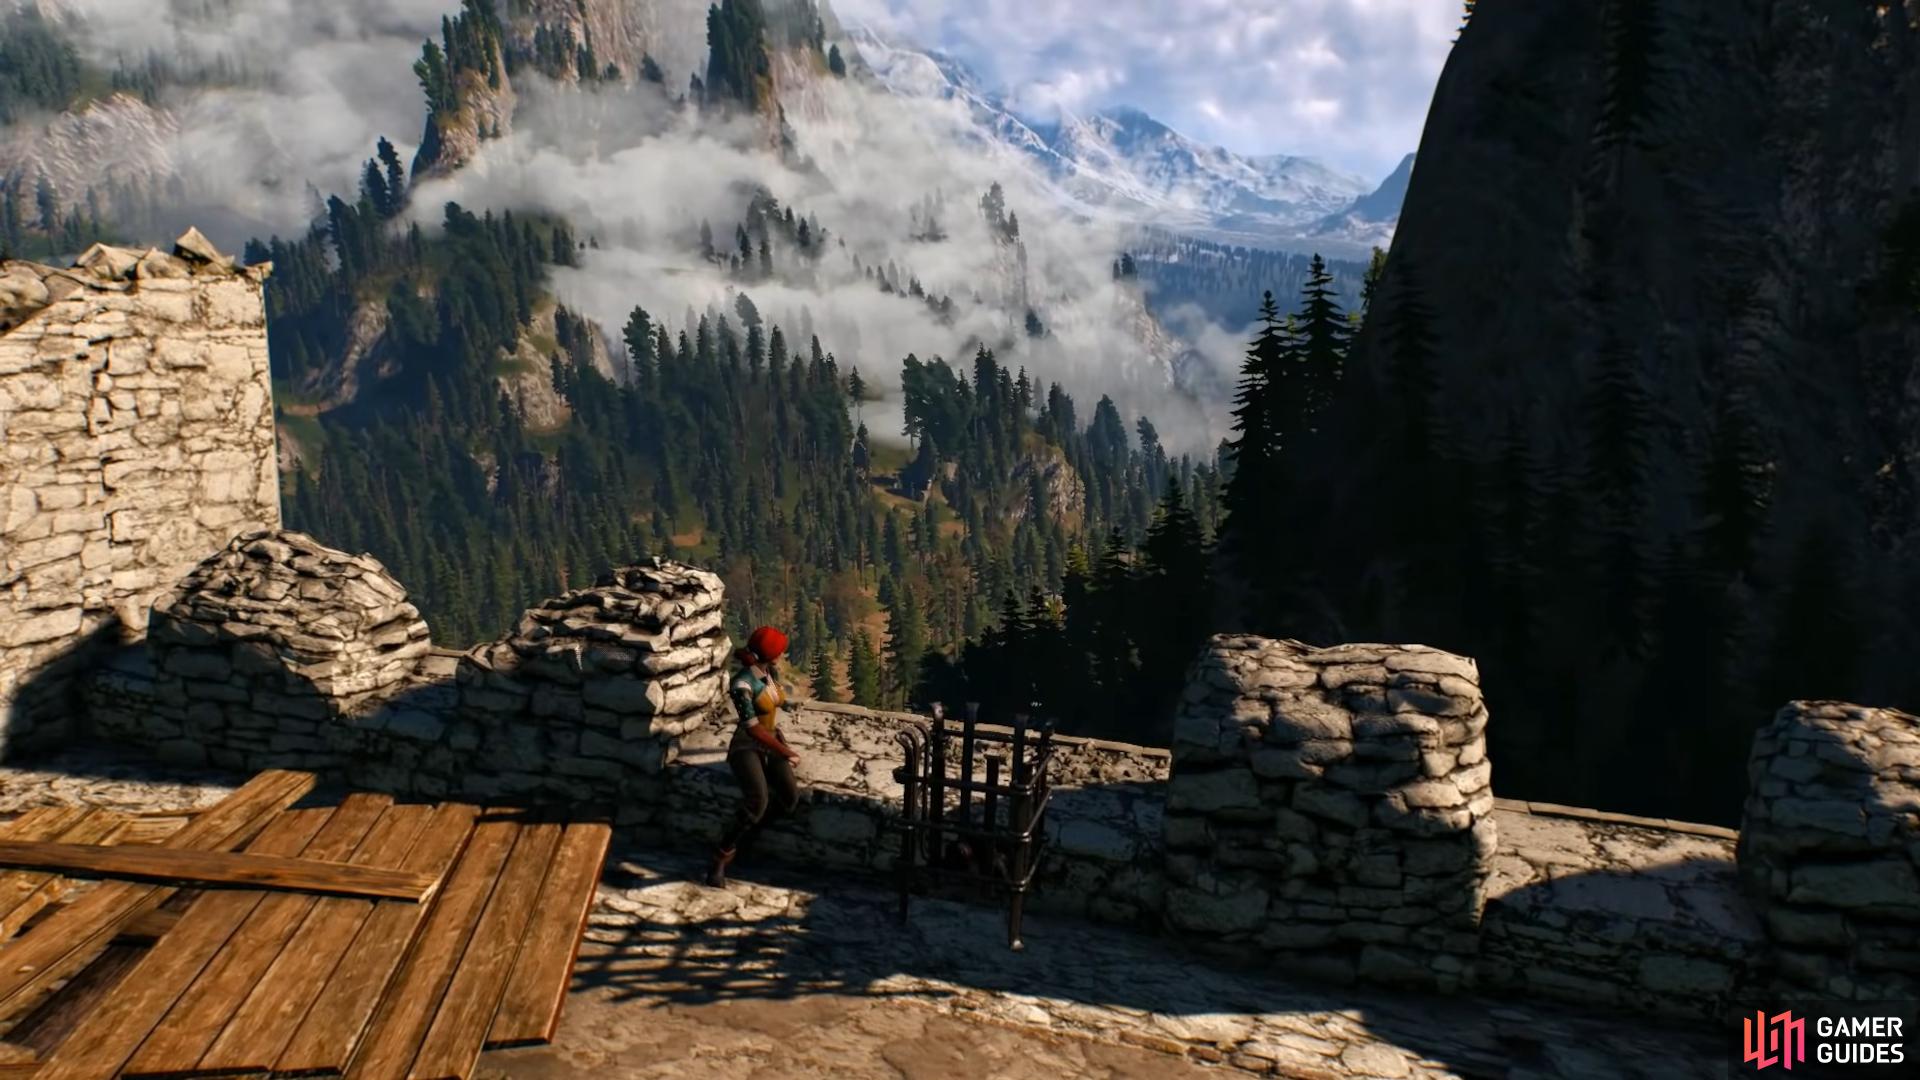 Here is a walkthrough for the Battle of Kaer Morhen’s main mission in Witcher 3.